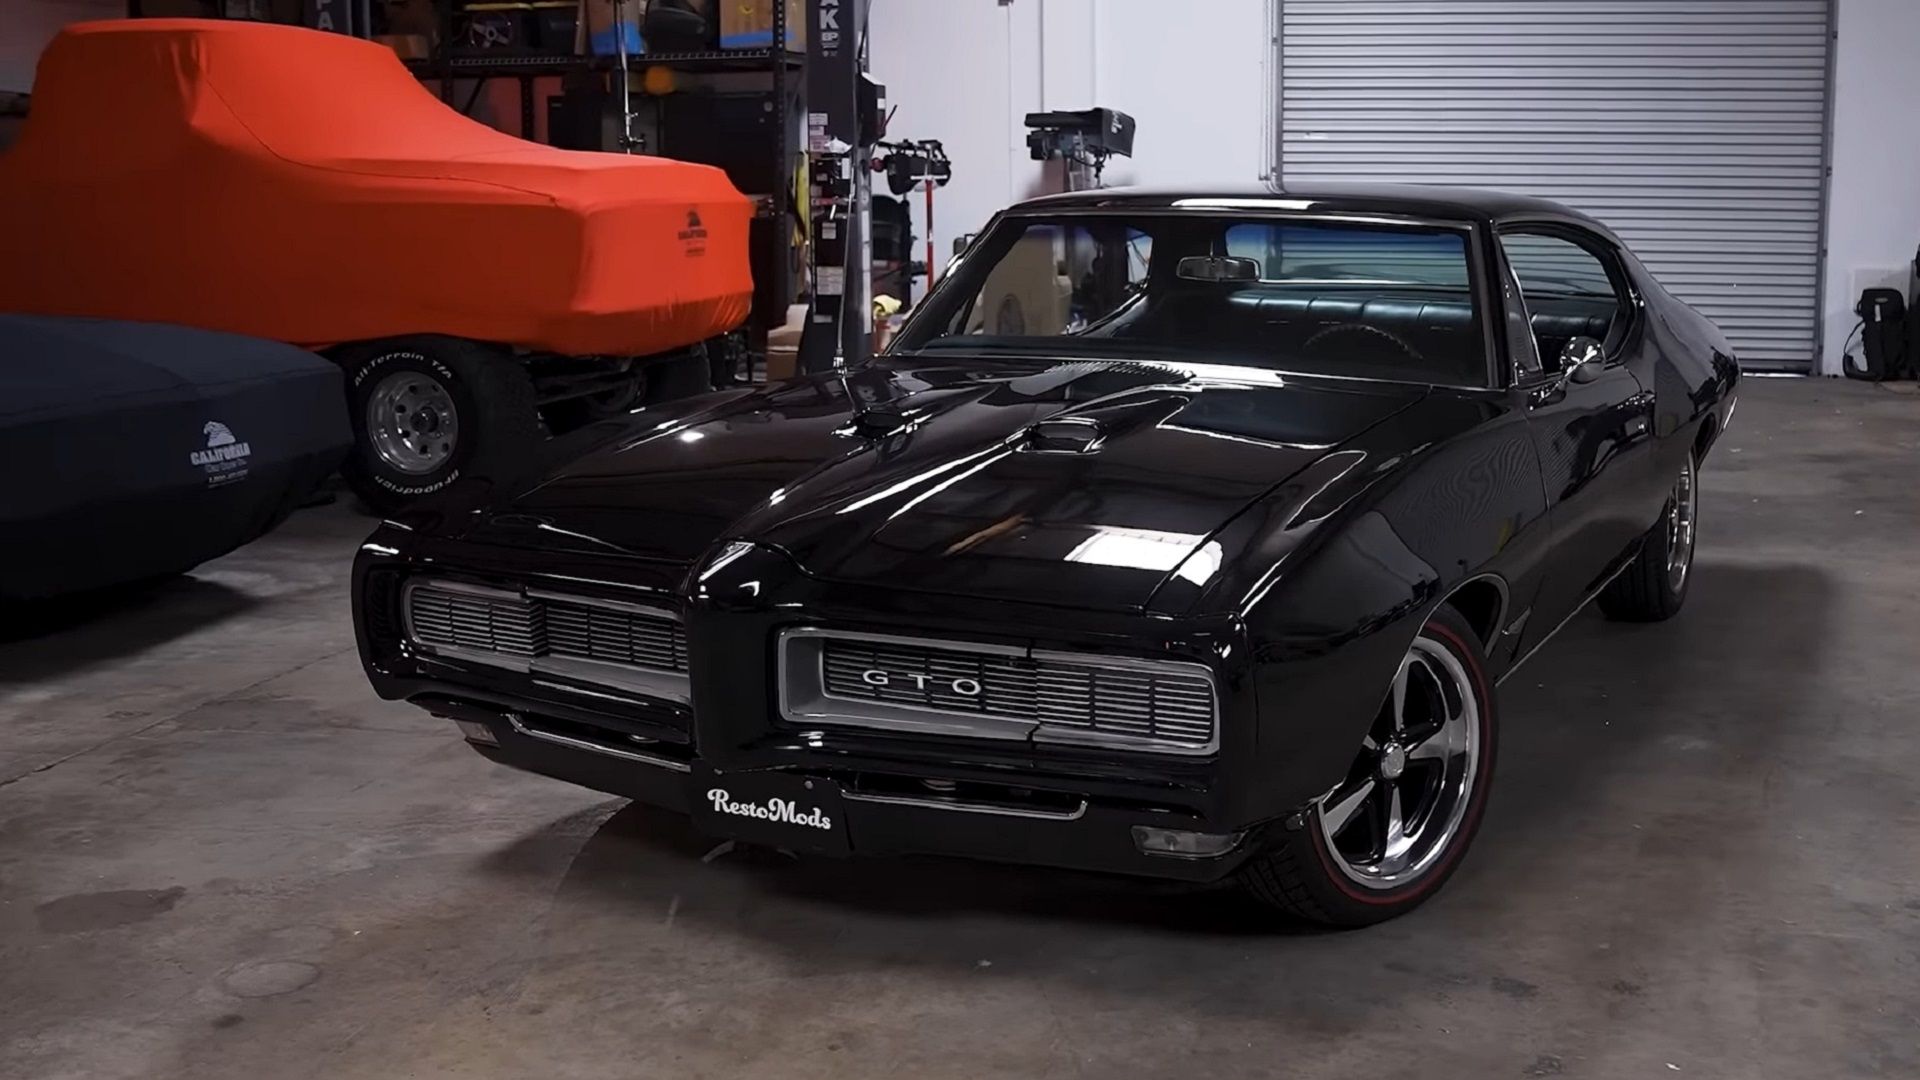 Black 1968 Pontiac GTO in garage from the front 